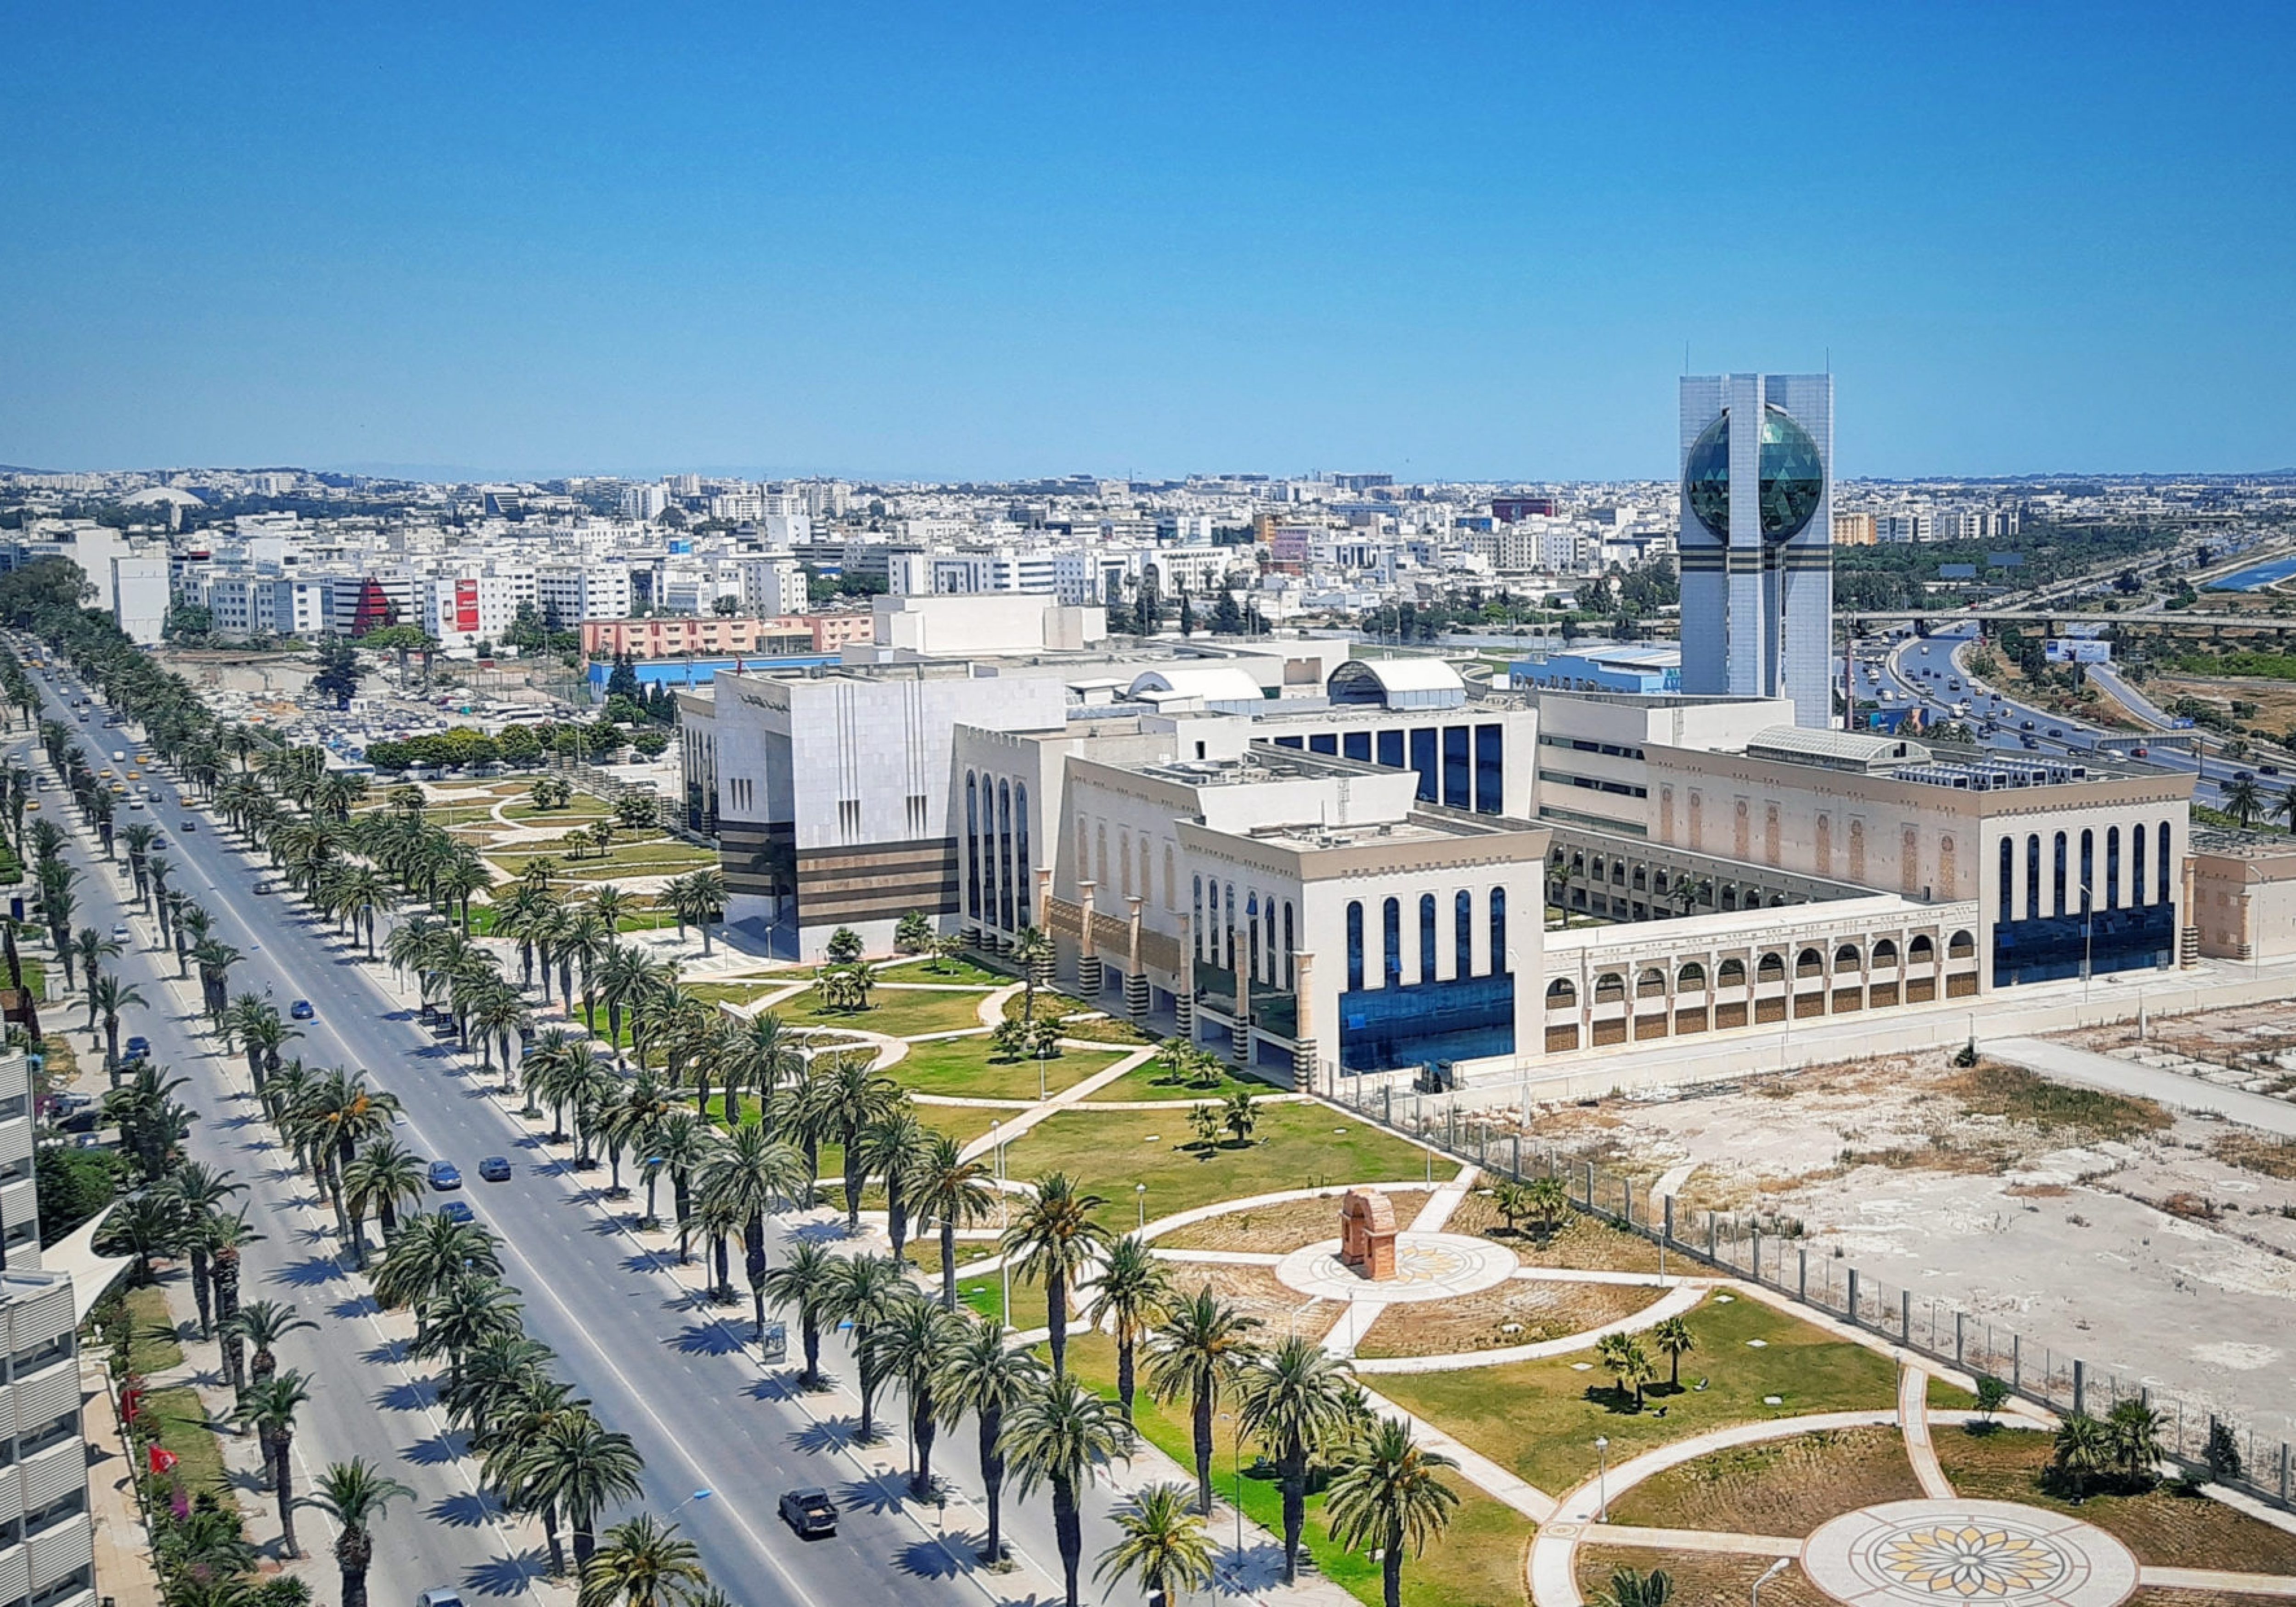 Tunis city. African & Middle Eastern Capacity Building Workshop